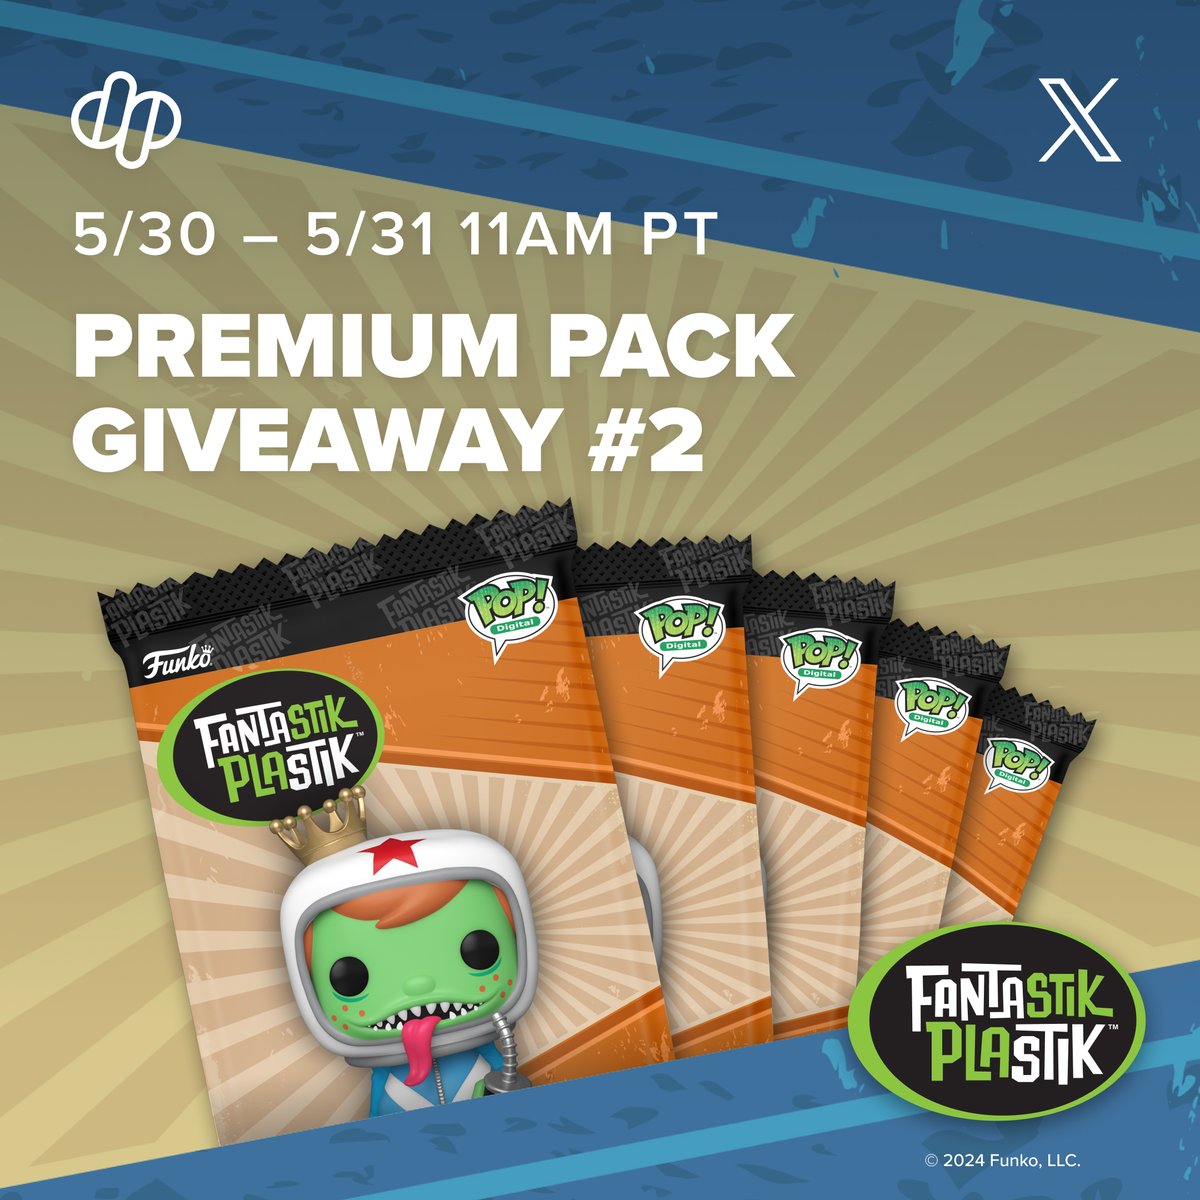 It's #Giveaway Time! We're giving away 5 Fantastik Plastik Series 2 Premium Packs to 5 lucky users!

How to enter:
👉 Like this post!
👉 Tag a friend in the comments!
👉 Share this post and tag @Dropppio 
👉 Subscribe to our email list on Droppp (if you aren't already)!

This